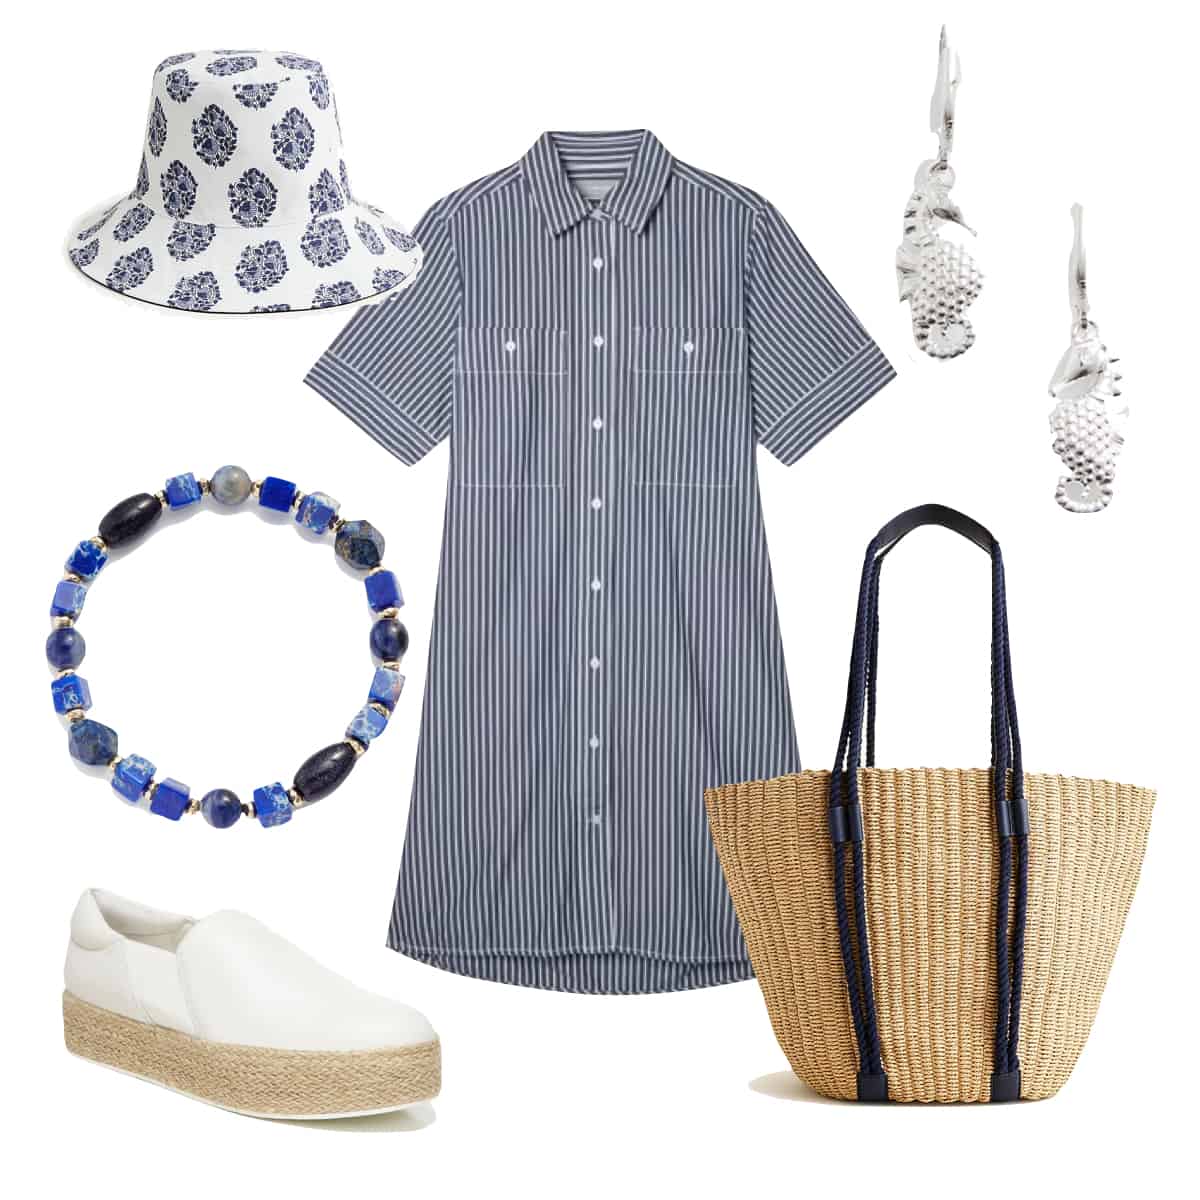 Nautical & nice…it’s hard to go wrong with blue and white